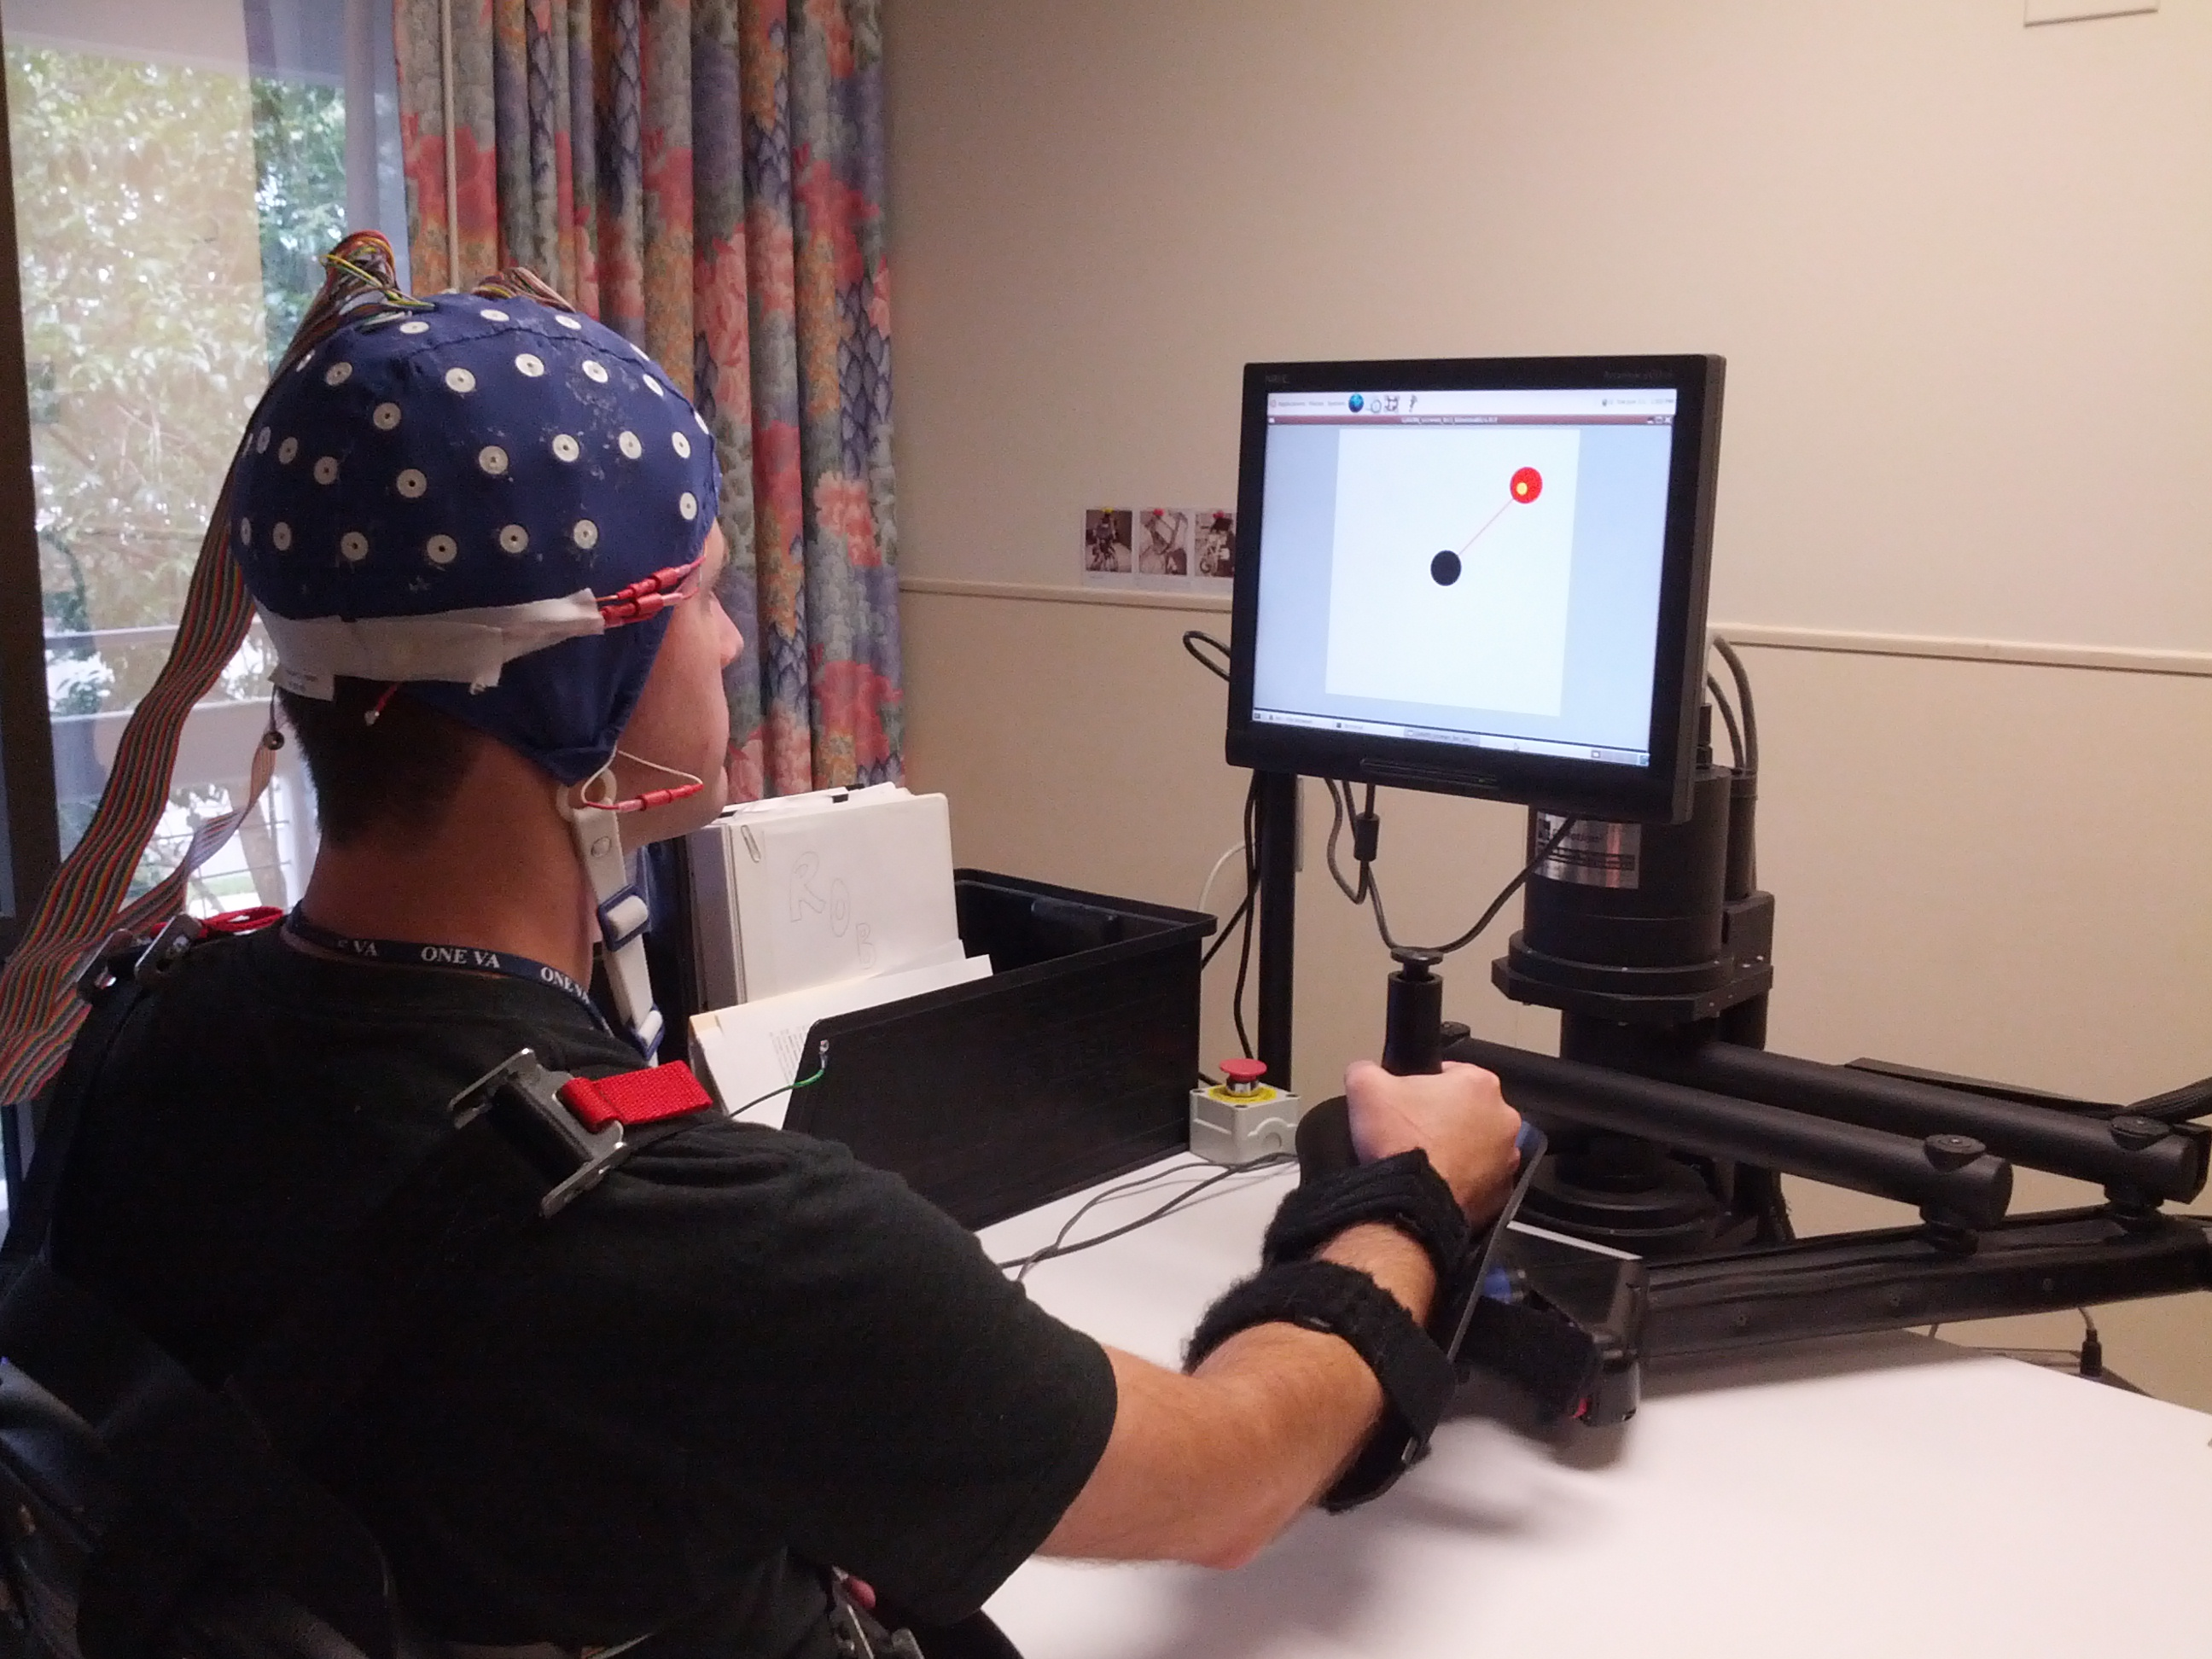 Research subject with EEG cap and therapy robot